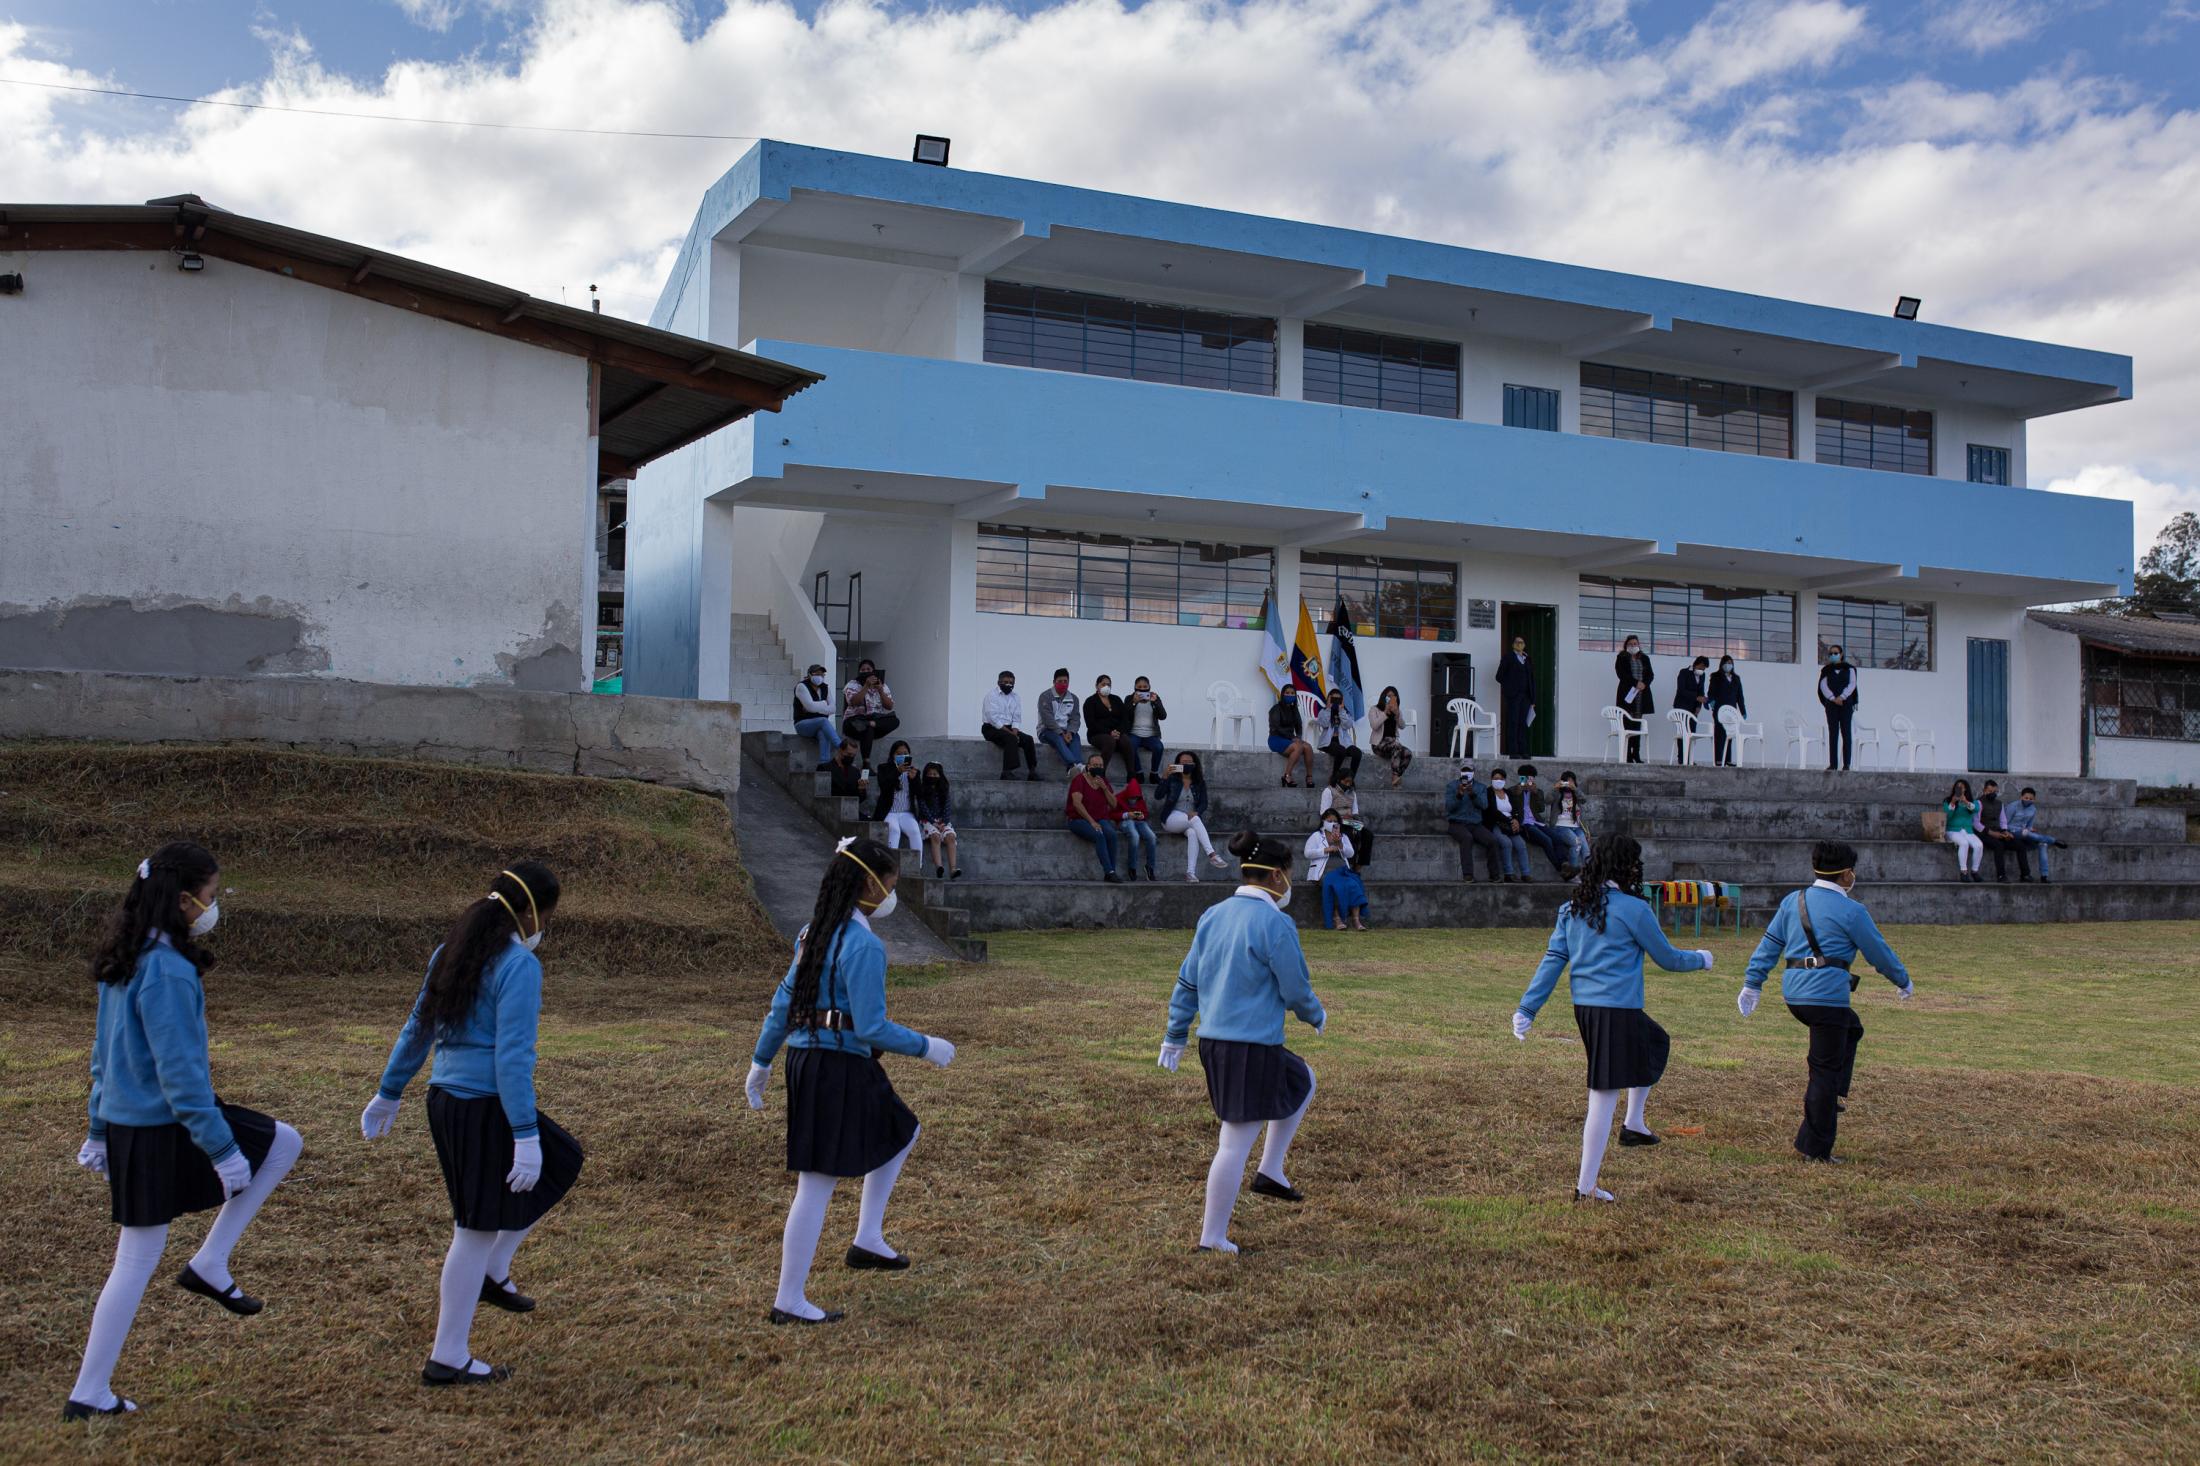 Closing ceremony of the school year held with all biosecurity measures in a rural area of Ecuador. Only the students on the school&#39;s honor roll, along with a family member, were part of the event. June 29, 2020. Cotgchoa-Ecuador. Andr&eacute;s Y&eacute;pez.